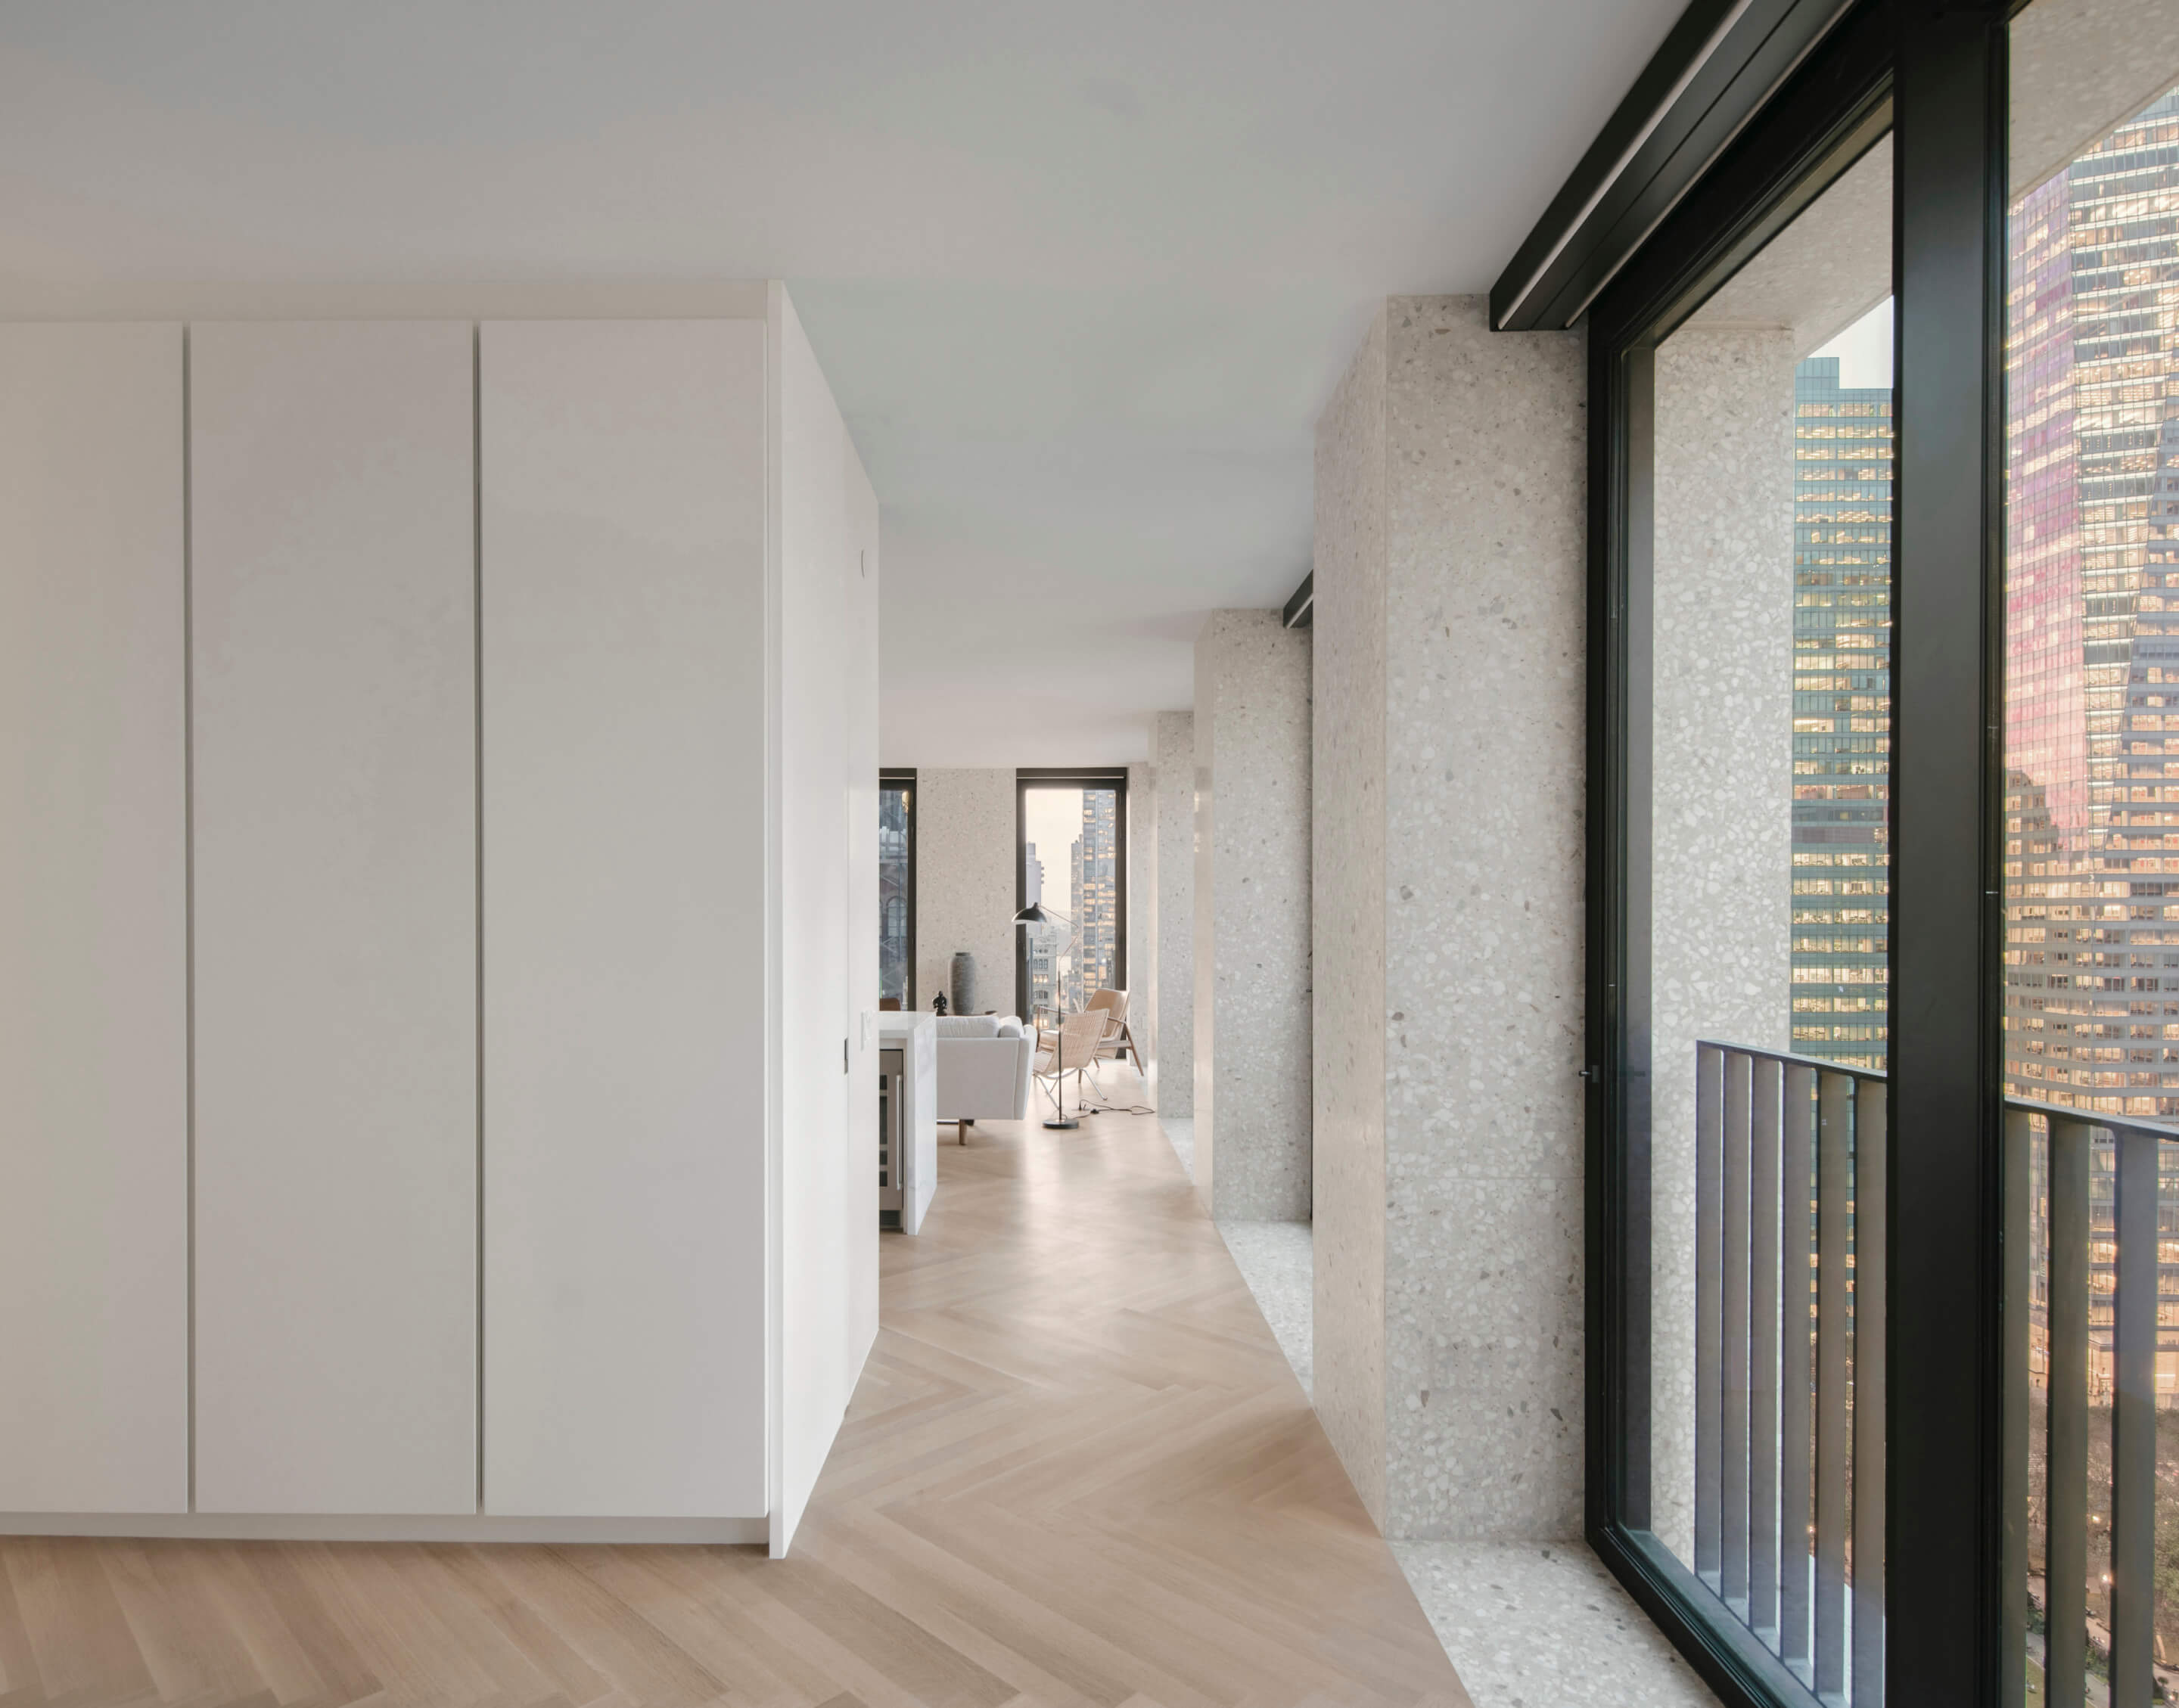 xTheBryant_Chipperfield_Interior-scaled.jpg.pagespeed.ic._ePcwWlPRx